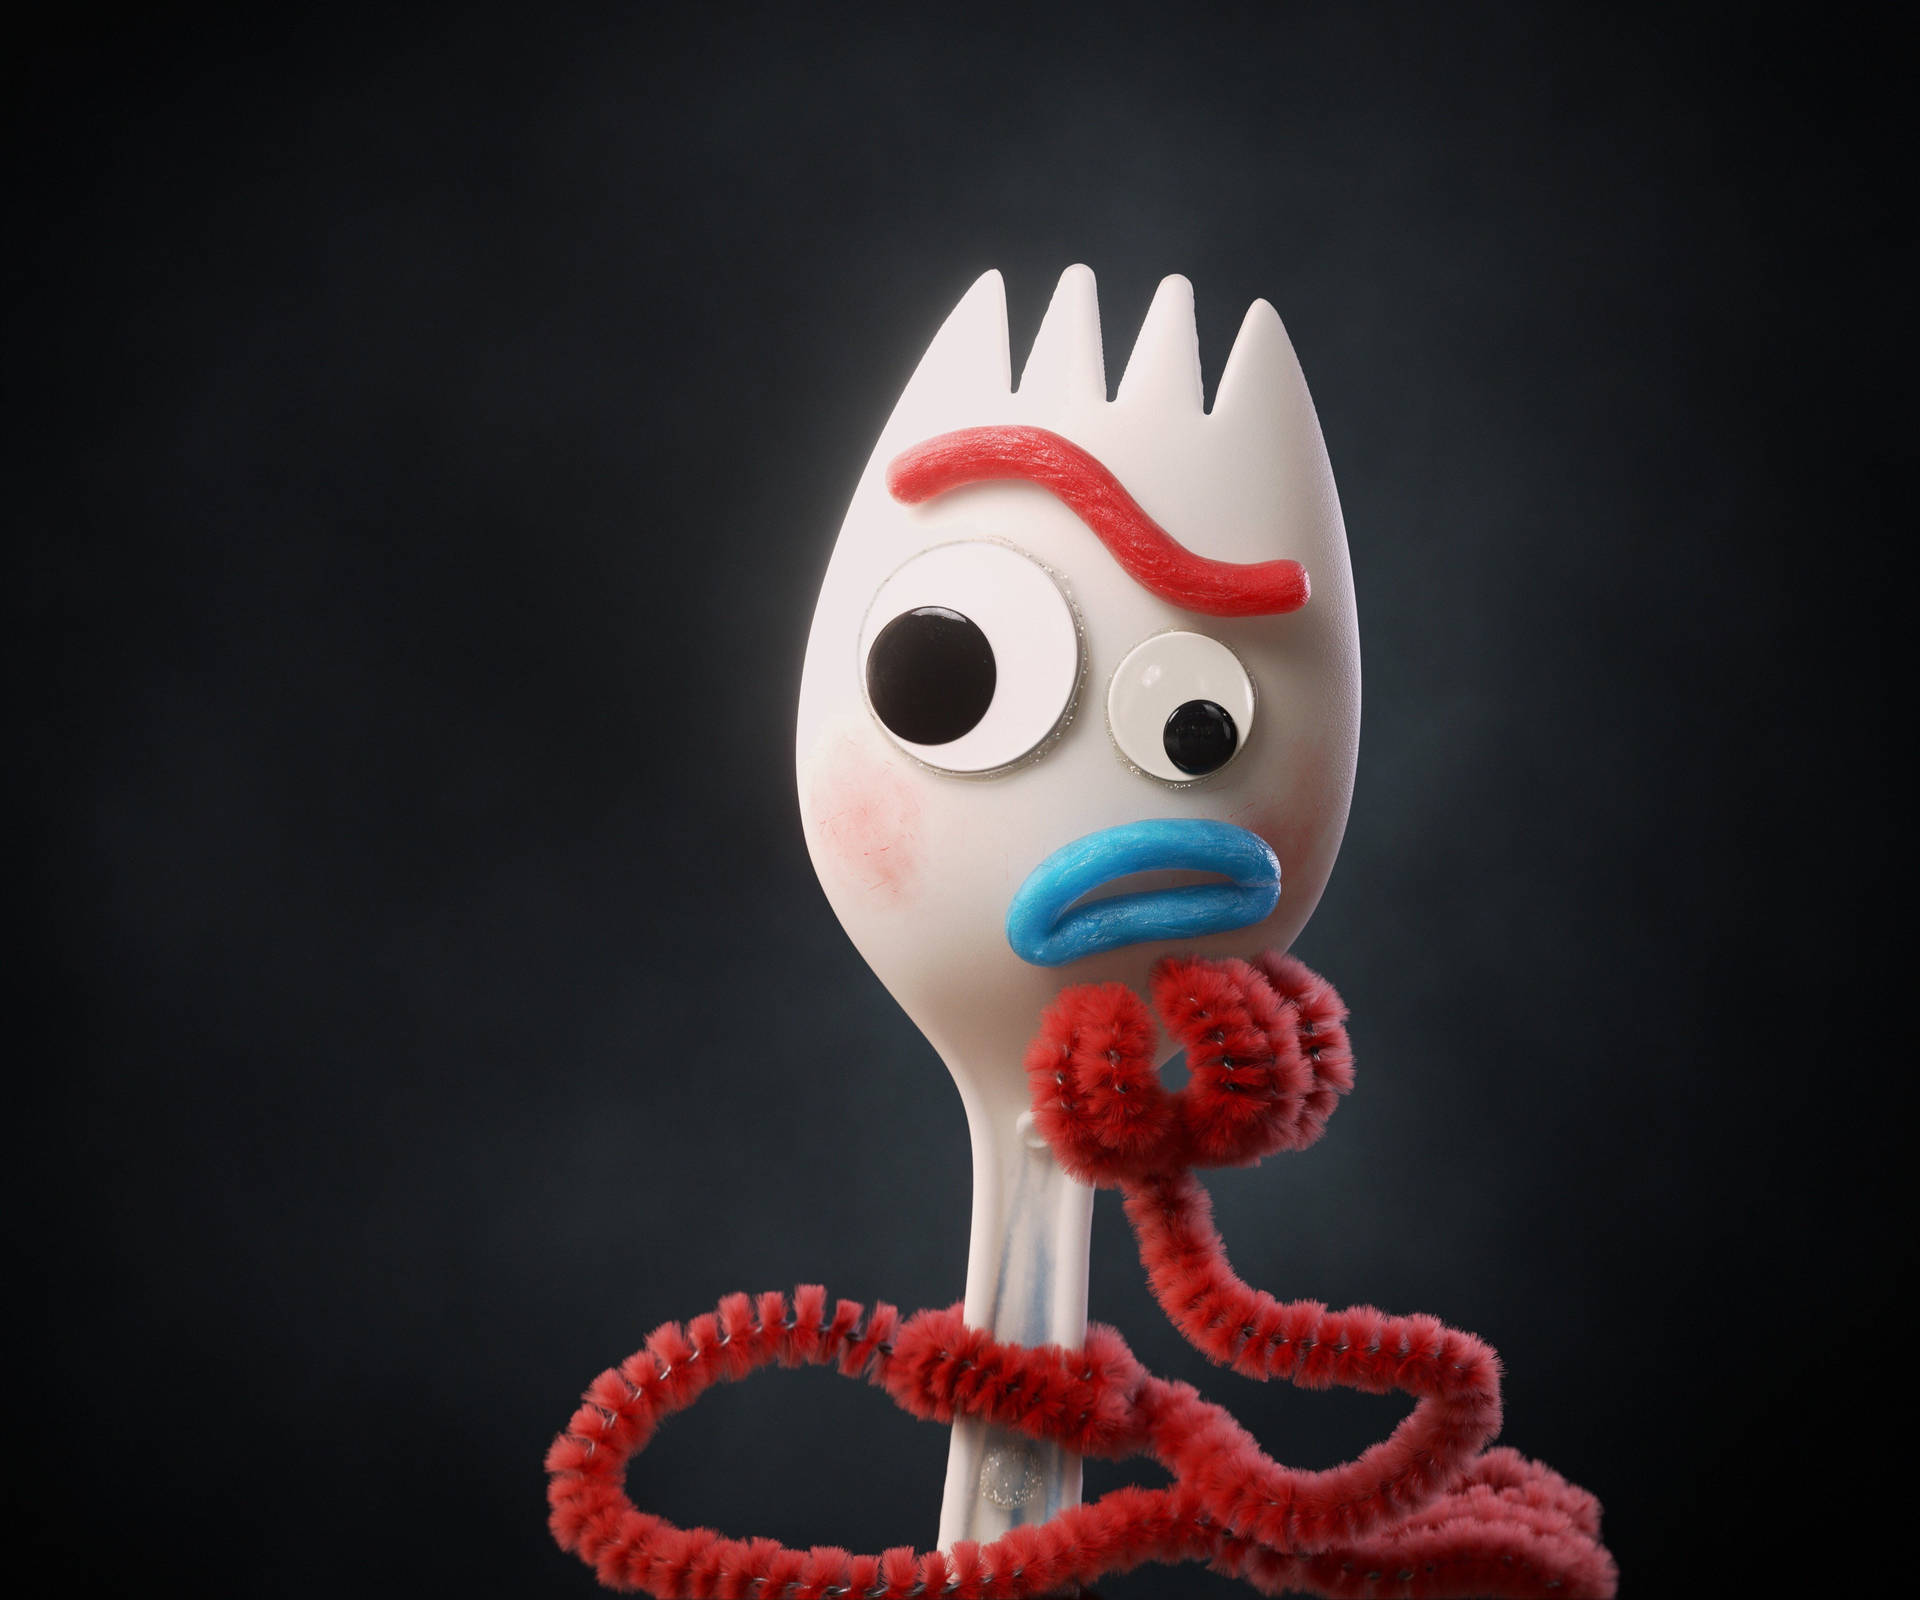 100+] Toy Story Forky Wallpapers